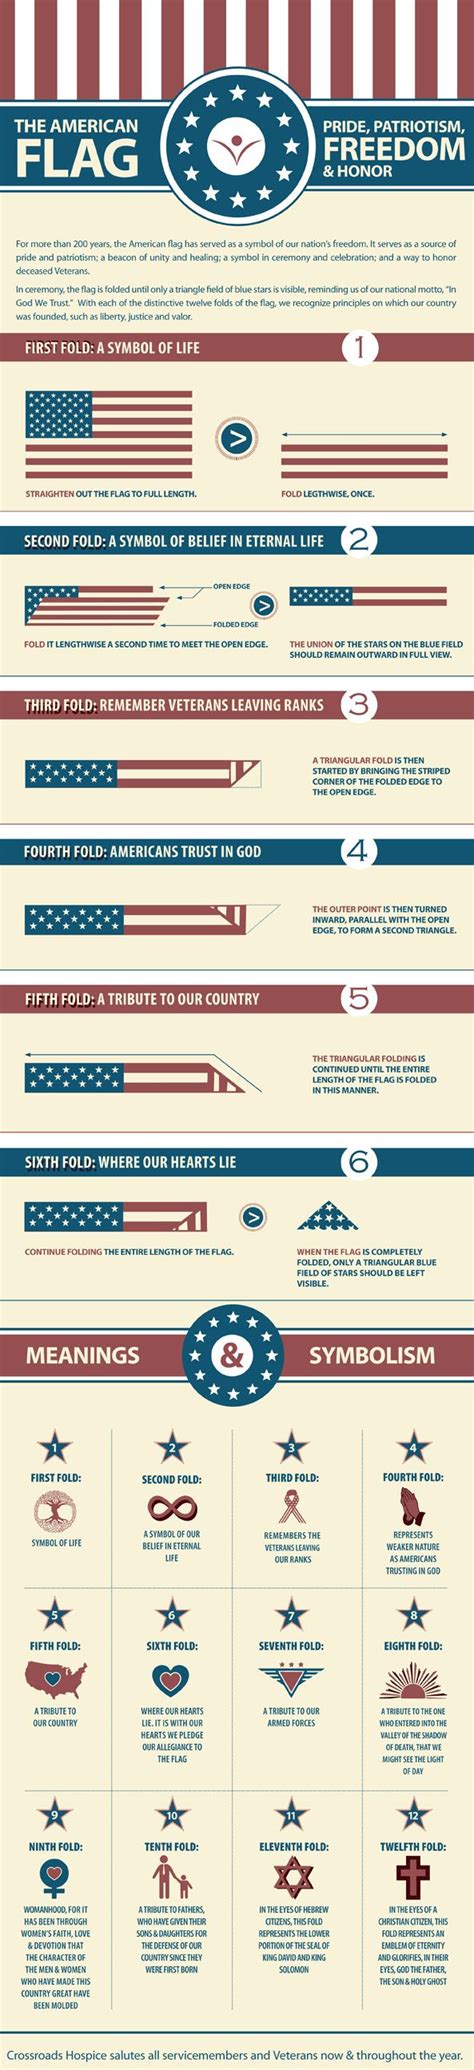 Folding the American Flag is an important part of many ceremonies. Learn how to fold it ...